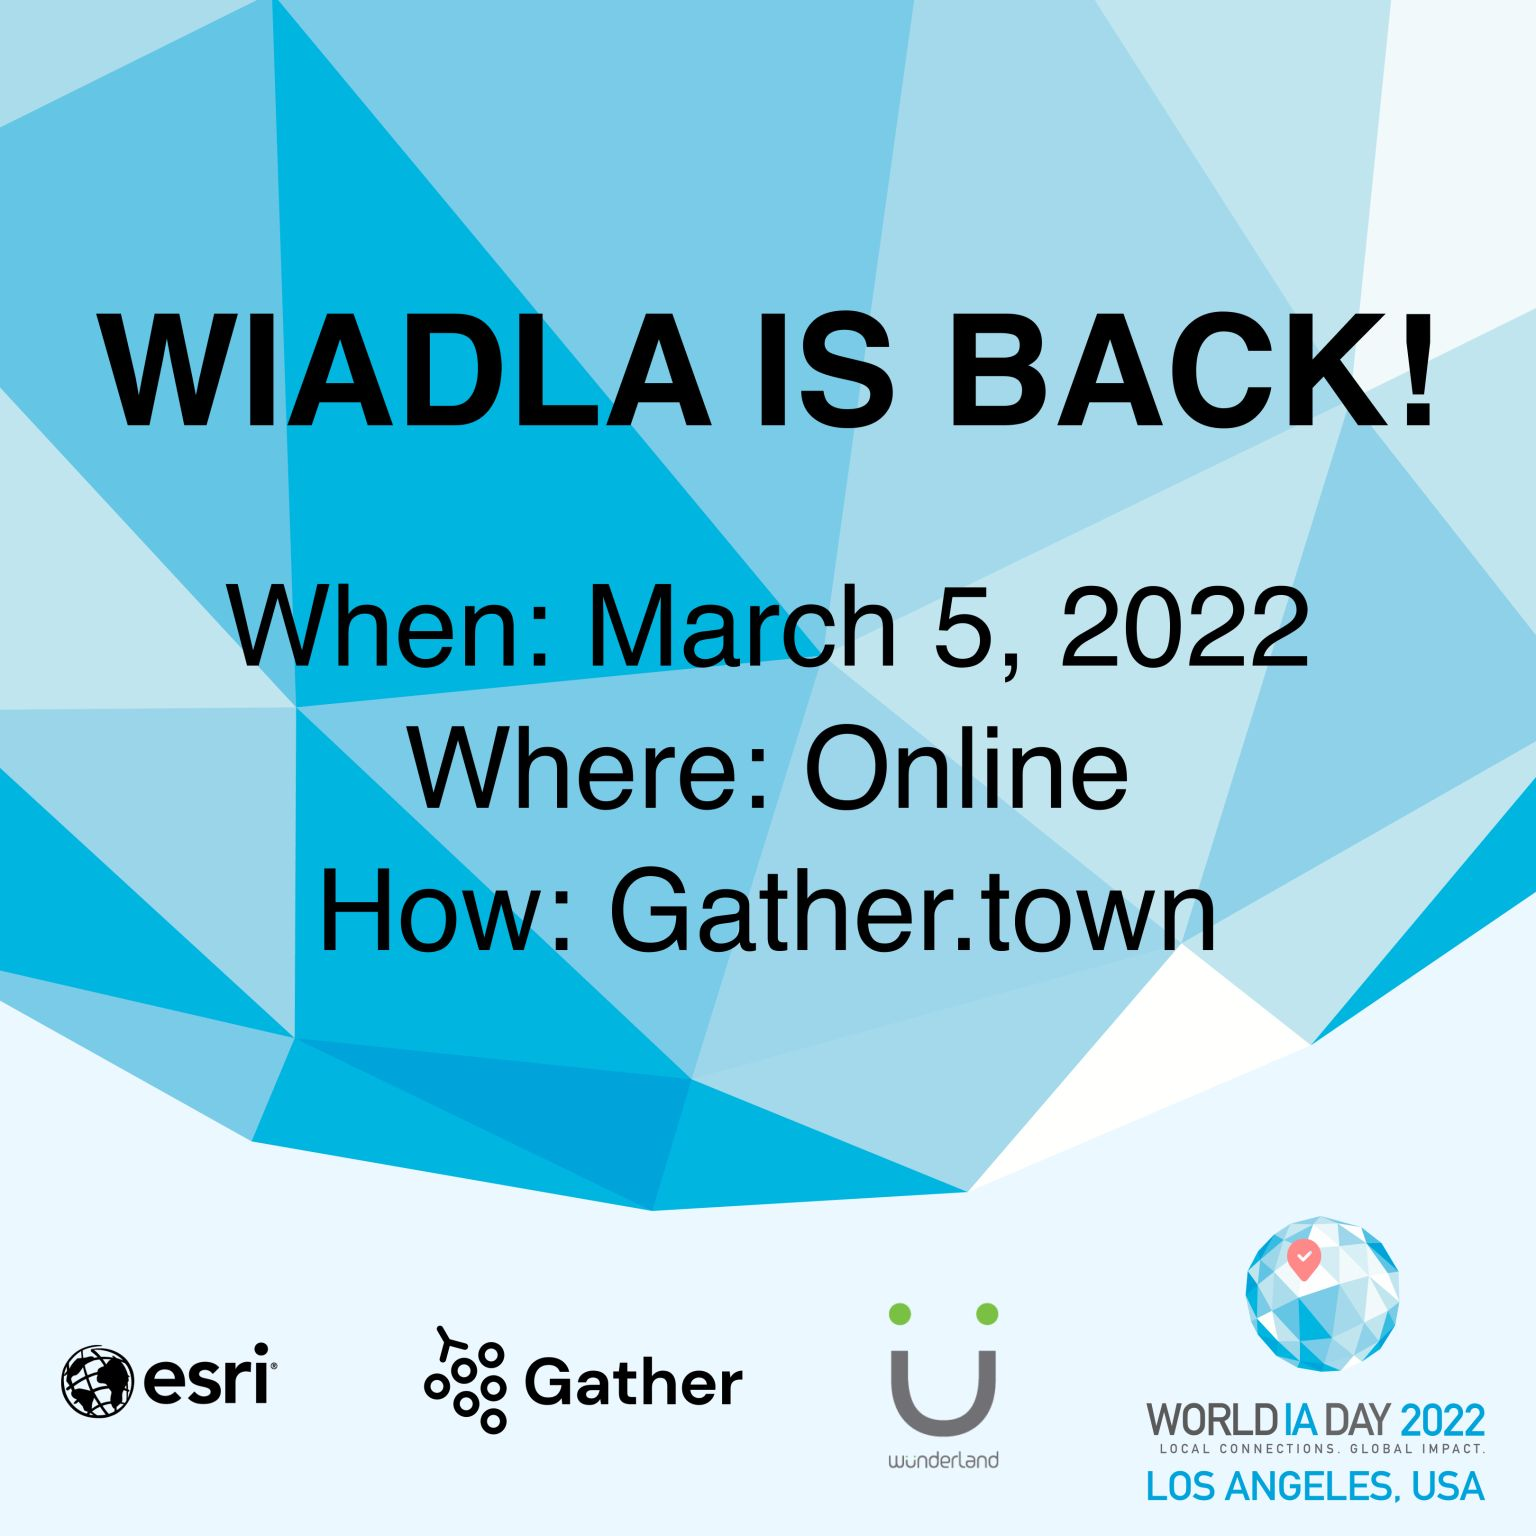 The announcement for WIADLA’s return for 2022 that our Marketing heads posted.